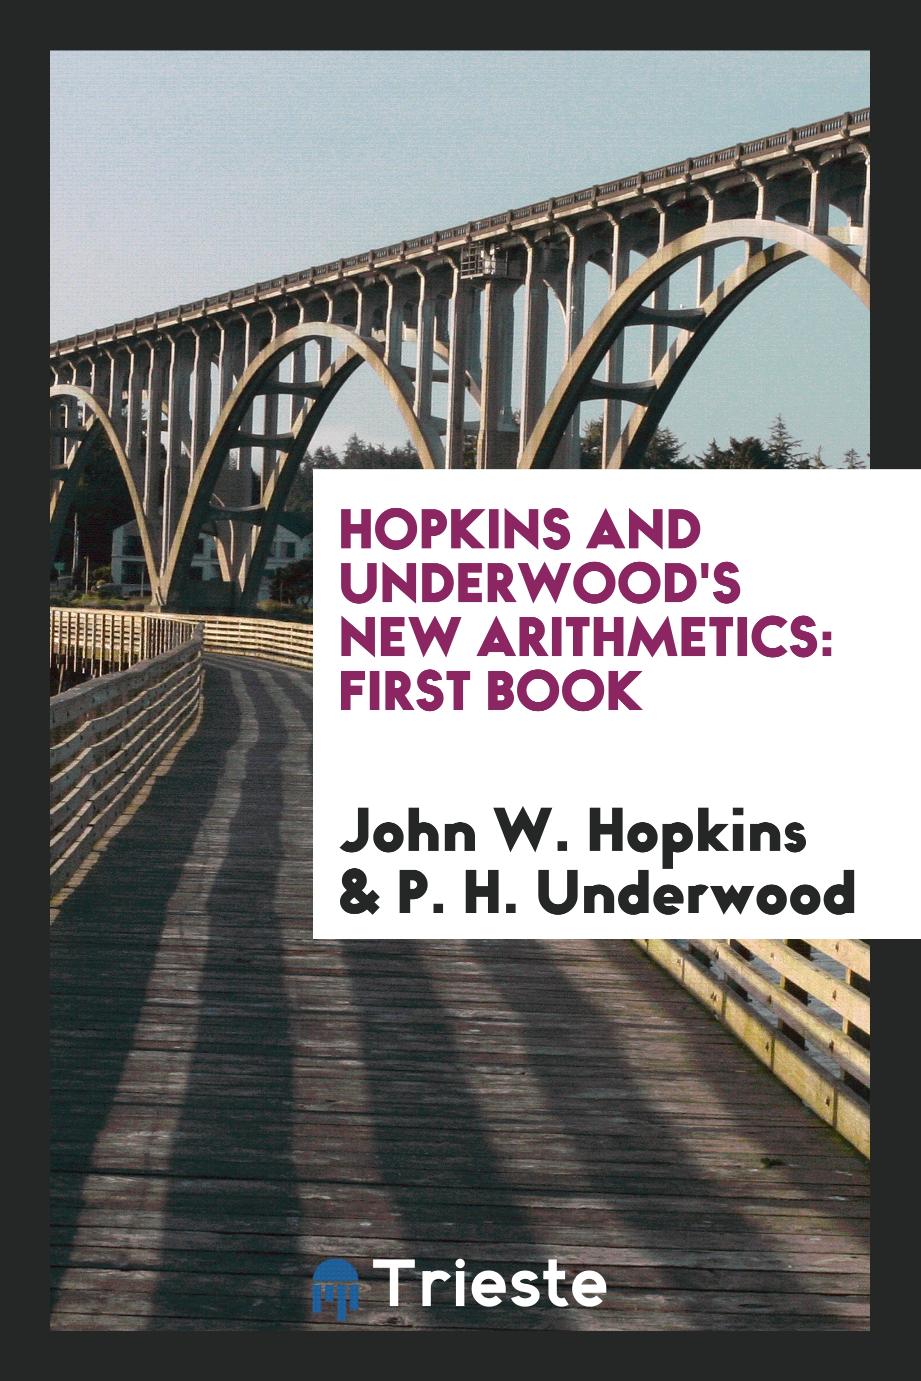 Hopkins and Underwood's New Arithmetics: First Book